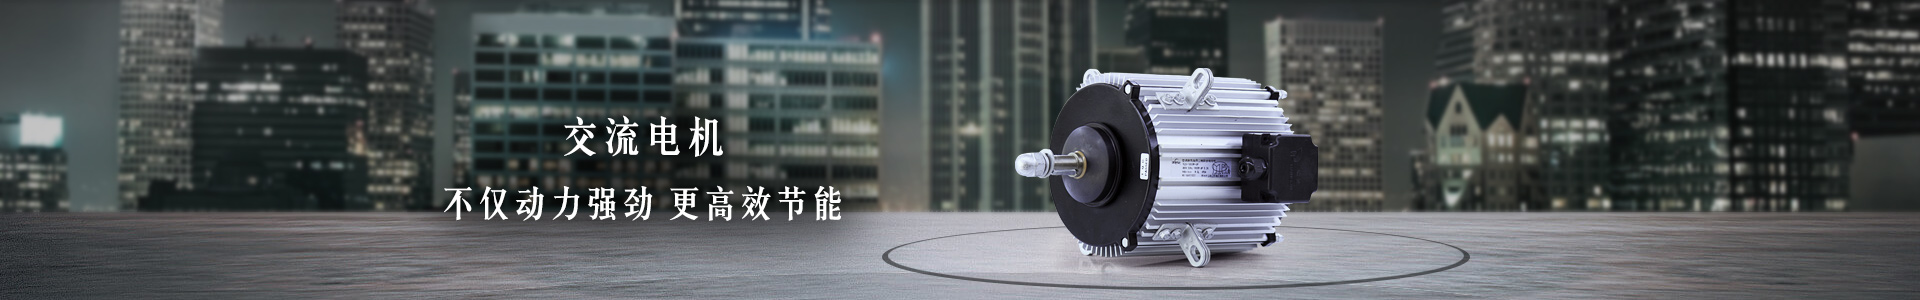 Ever Power ac gear motor is not only powerful, but also more efficient and energy-saving